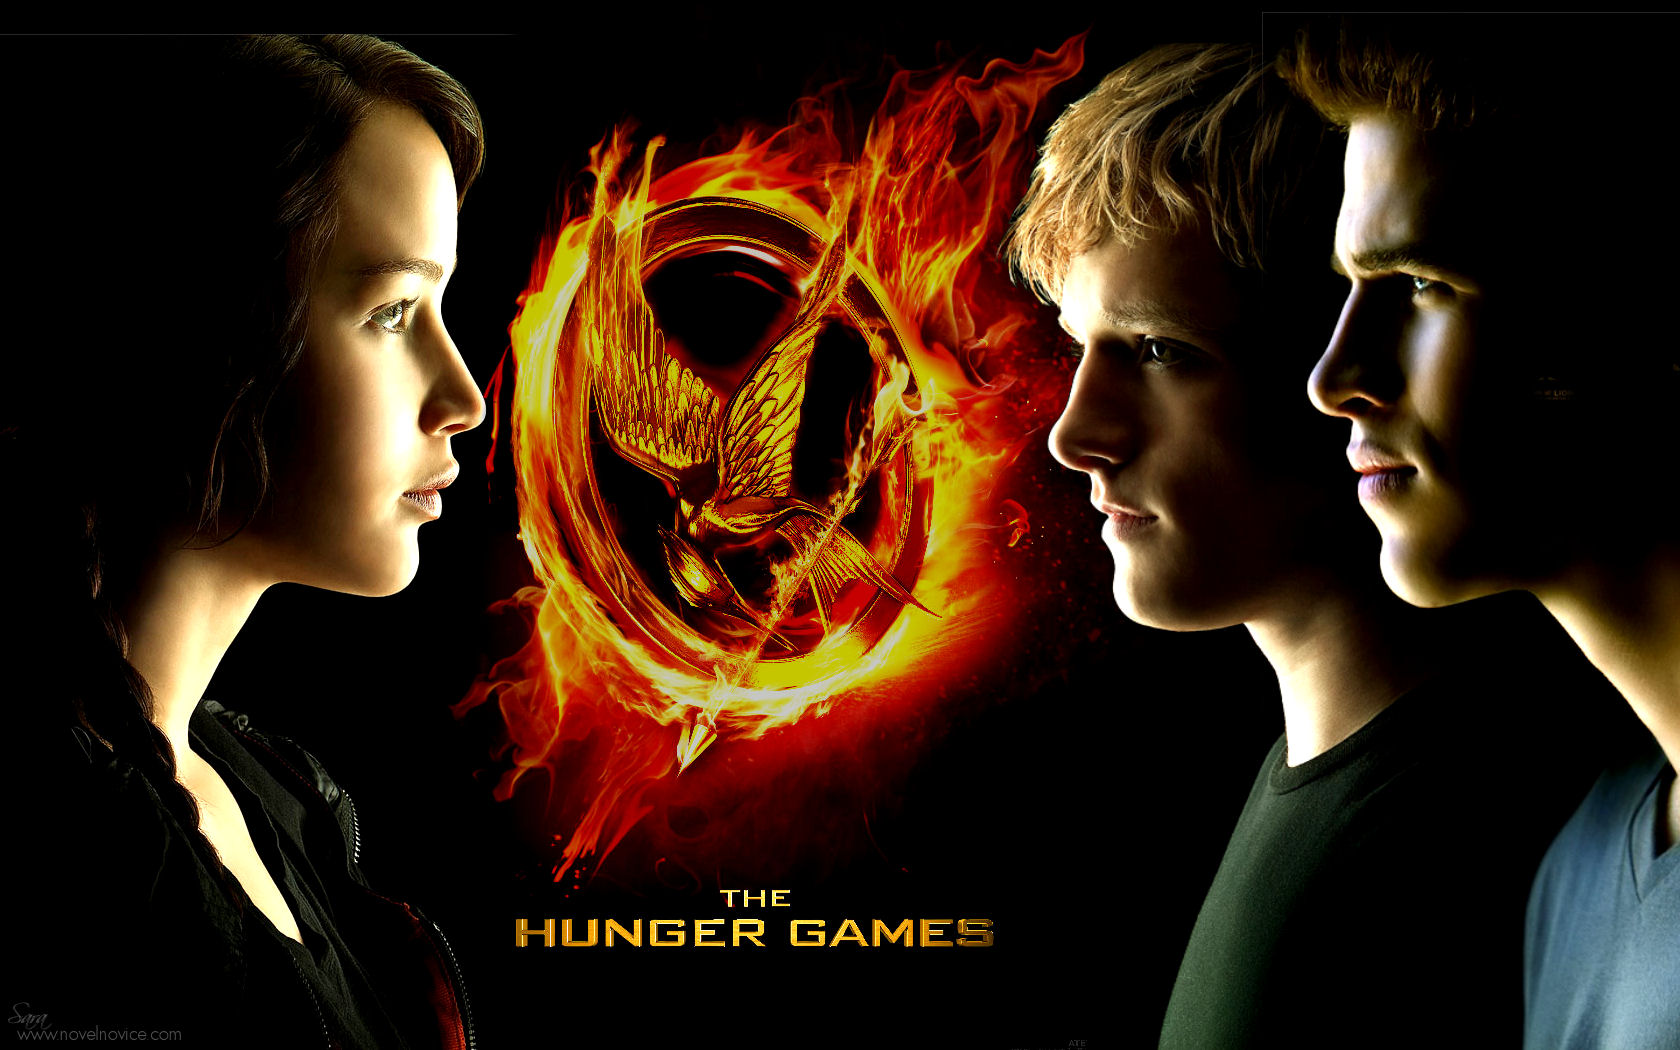 Film Critic Hunger Games BOOKAHOLICS till the End of Times